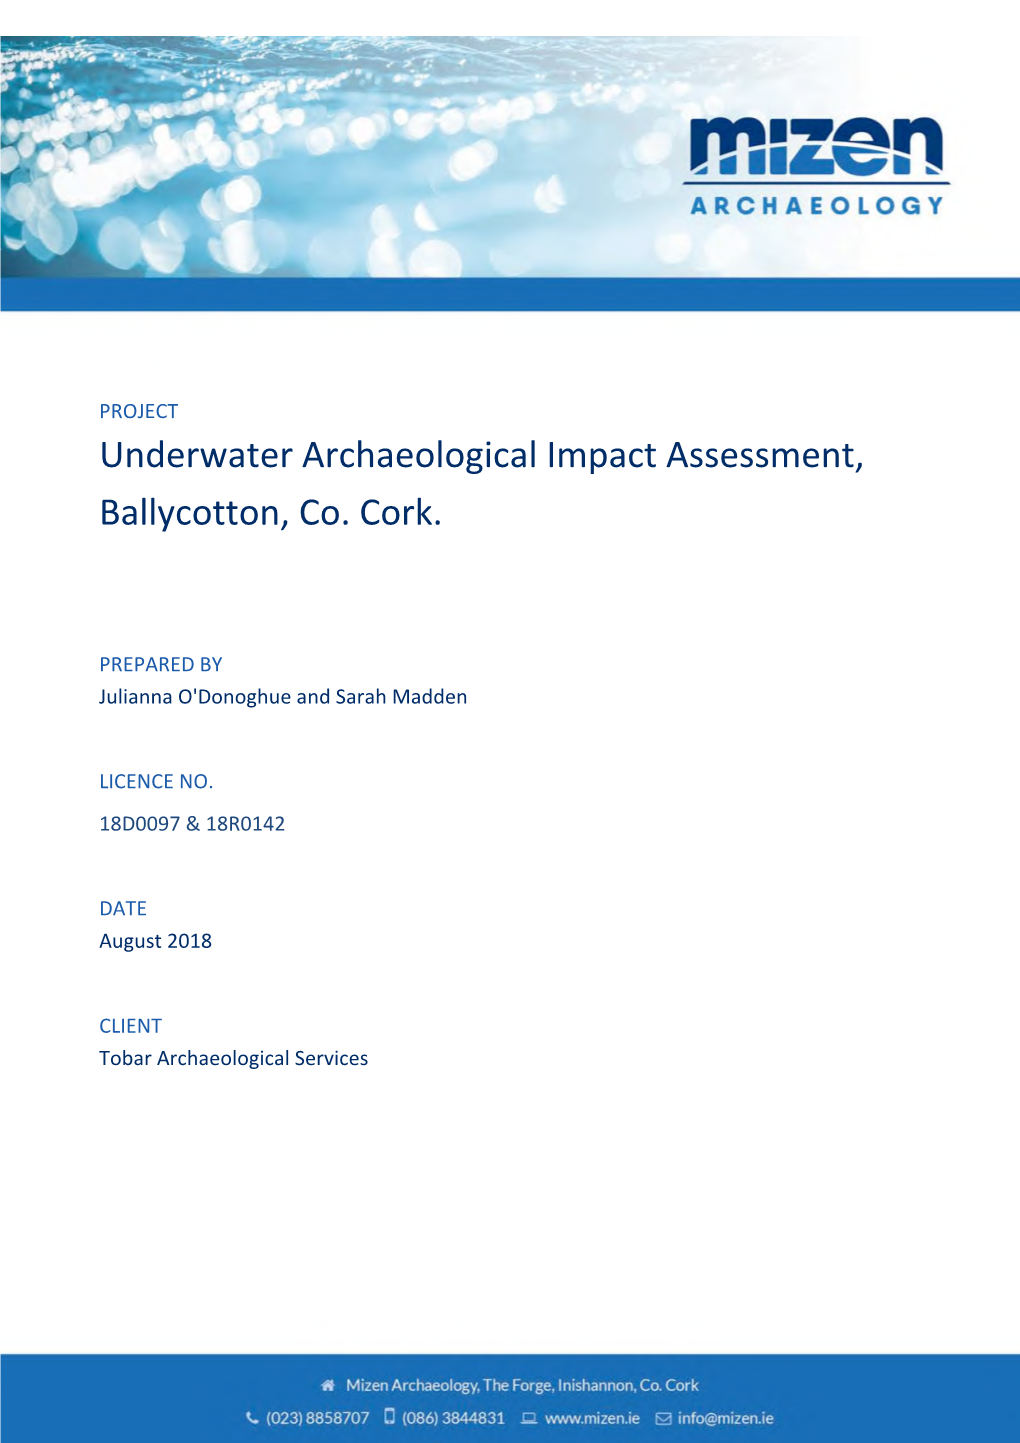 Underwater Archaeological Impact Assessment, Ballycotton, Co. Cork